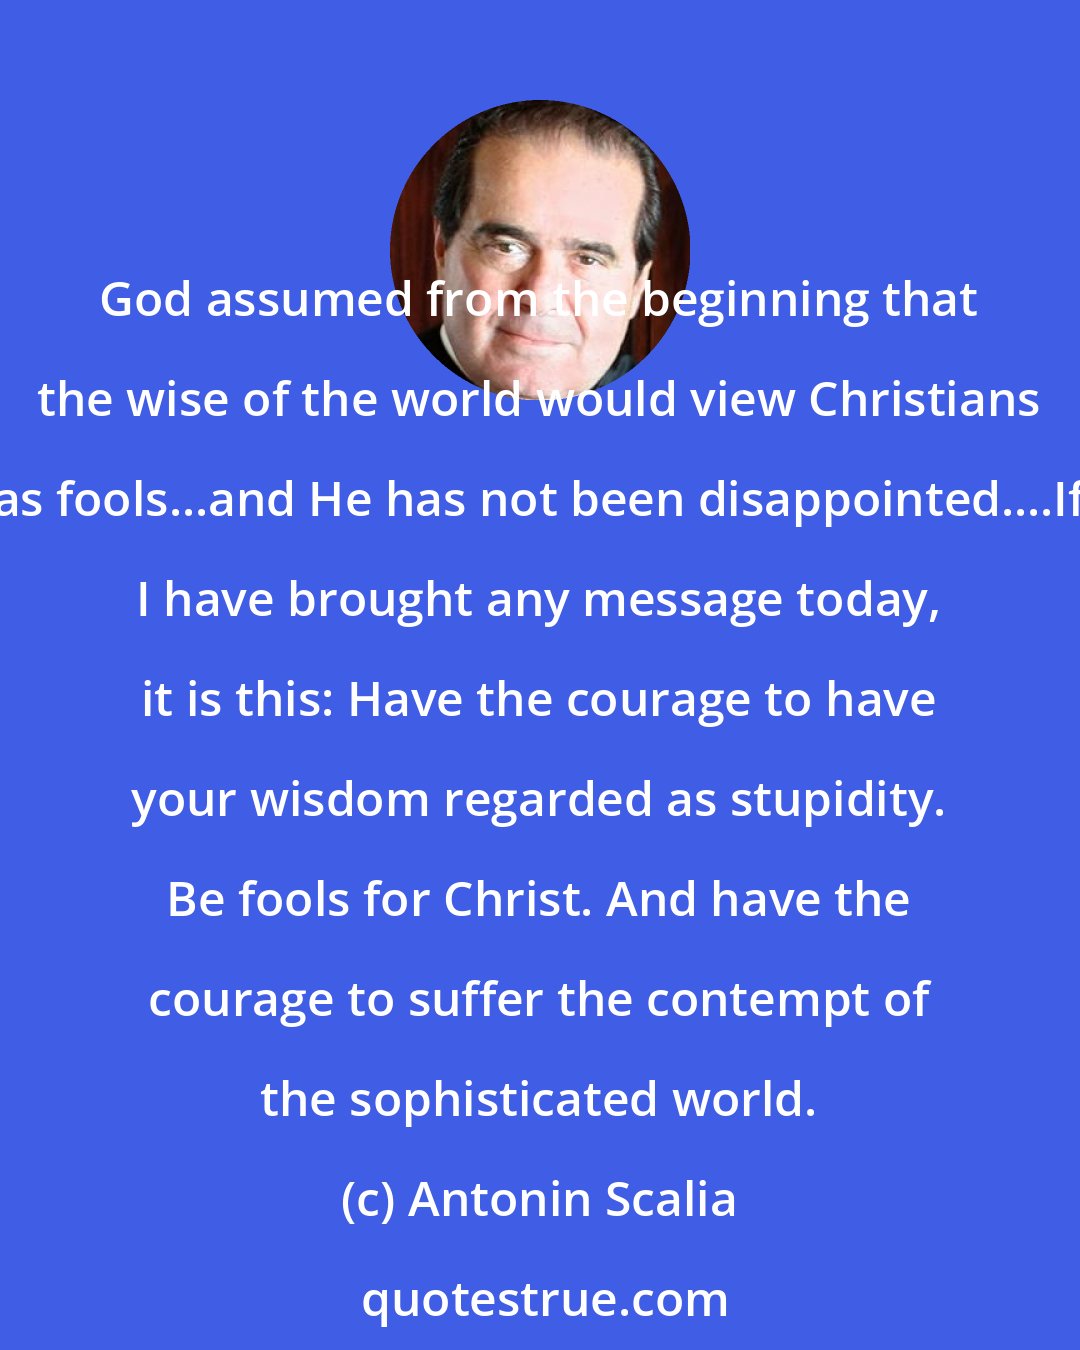 Antonin Scalia: God assumed from the beginning that the wise of the world would view Christians as fools...and He has not been disappointed....If I have brought any message today, it is this: Have the courage to have your wisdom regarded as stupidity. Be fools for Christ. And have the courage to suffer the contempt of the sophisticated world.